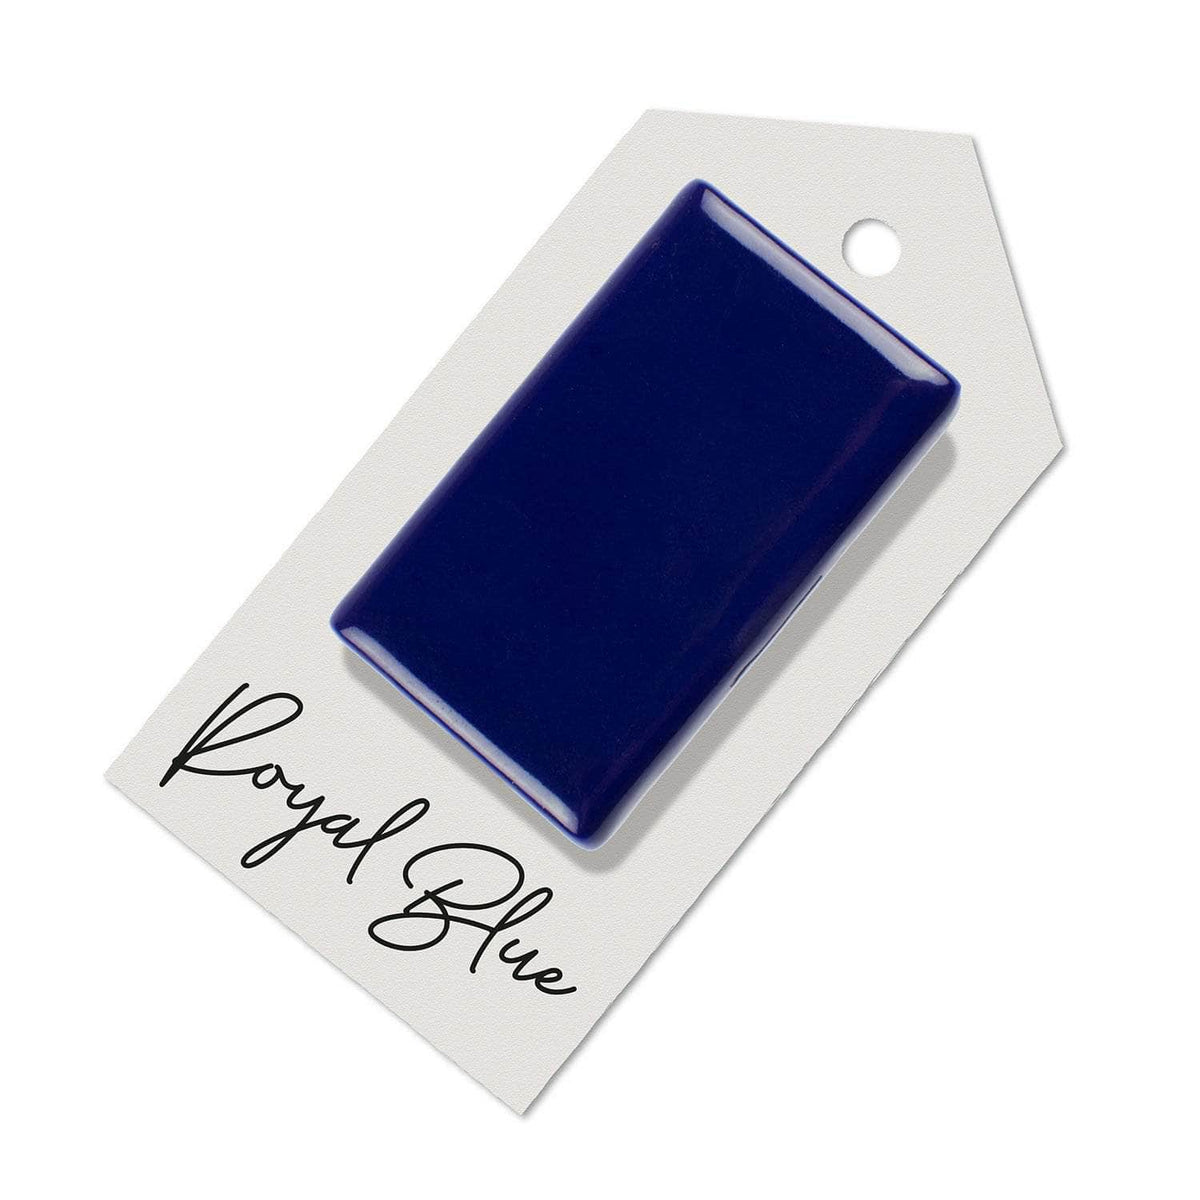 Royal Blue sample for Aga range cooker re-enamelling &amp; reconditioned cookers